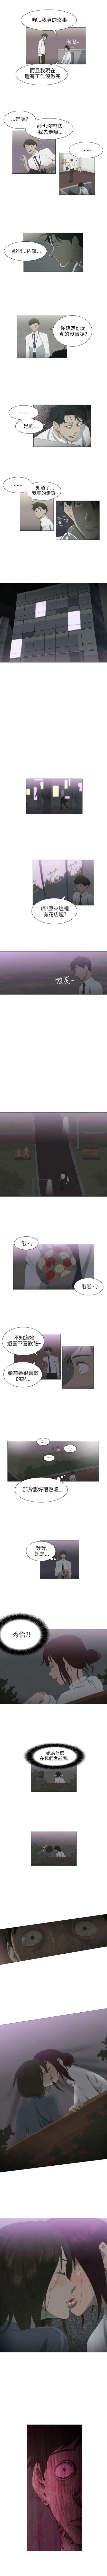 Passion 蛇精潮穴 1-31 Eat - Page 12